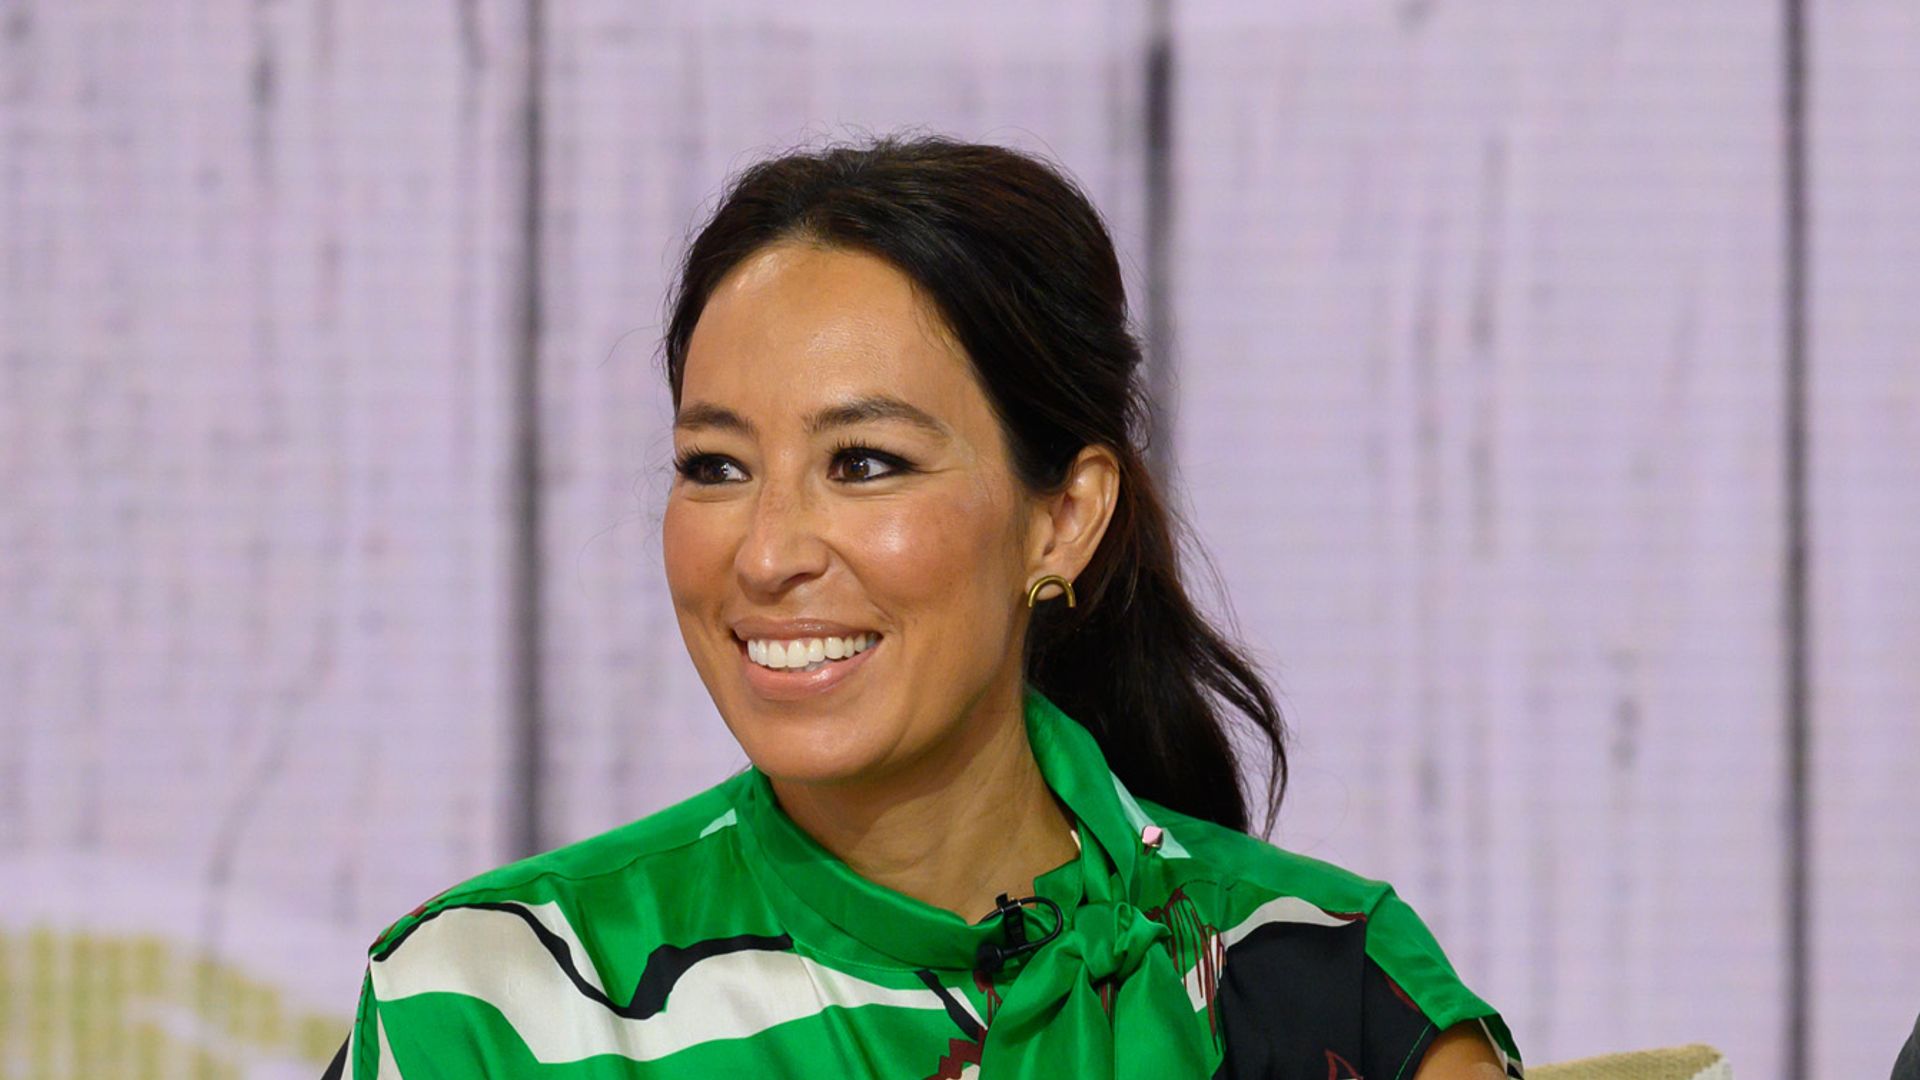 Joanna Gaines in Studio 1A on Thursday July 15, 2021